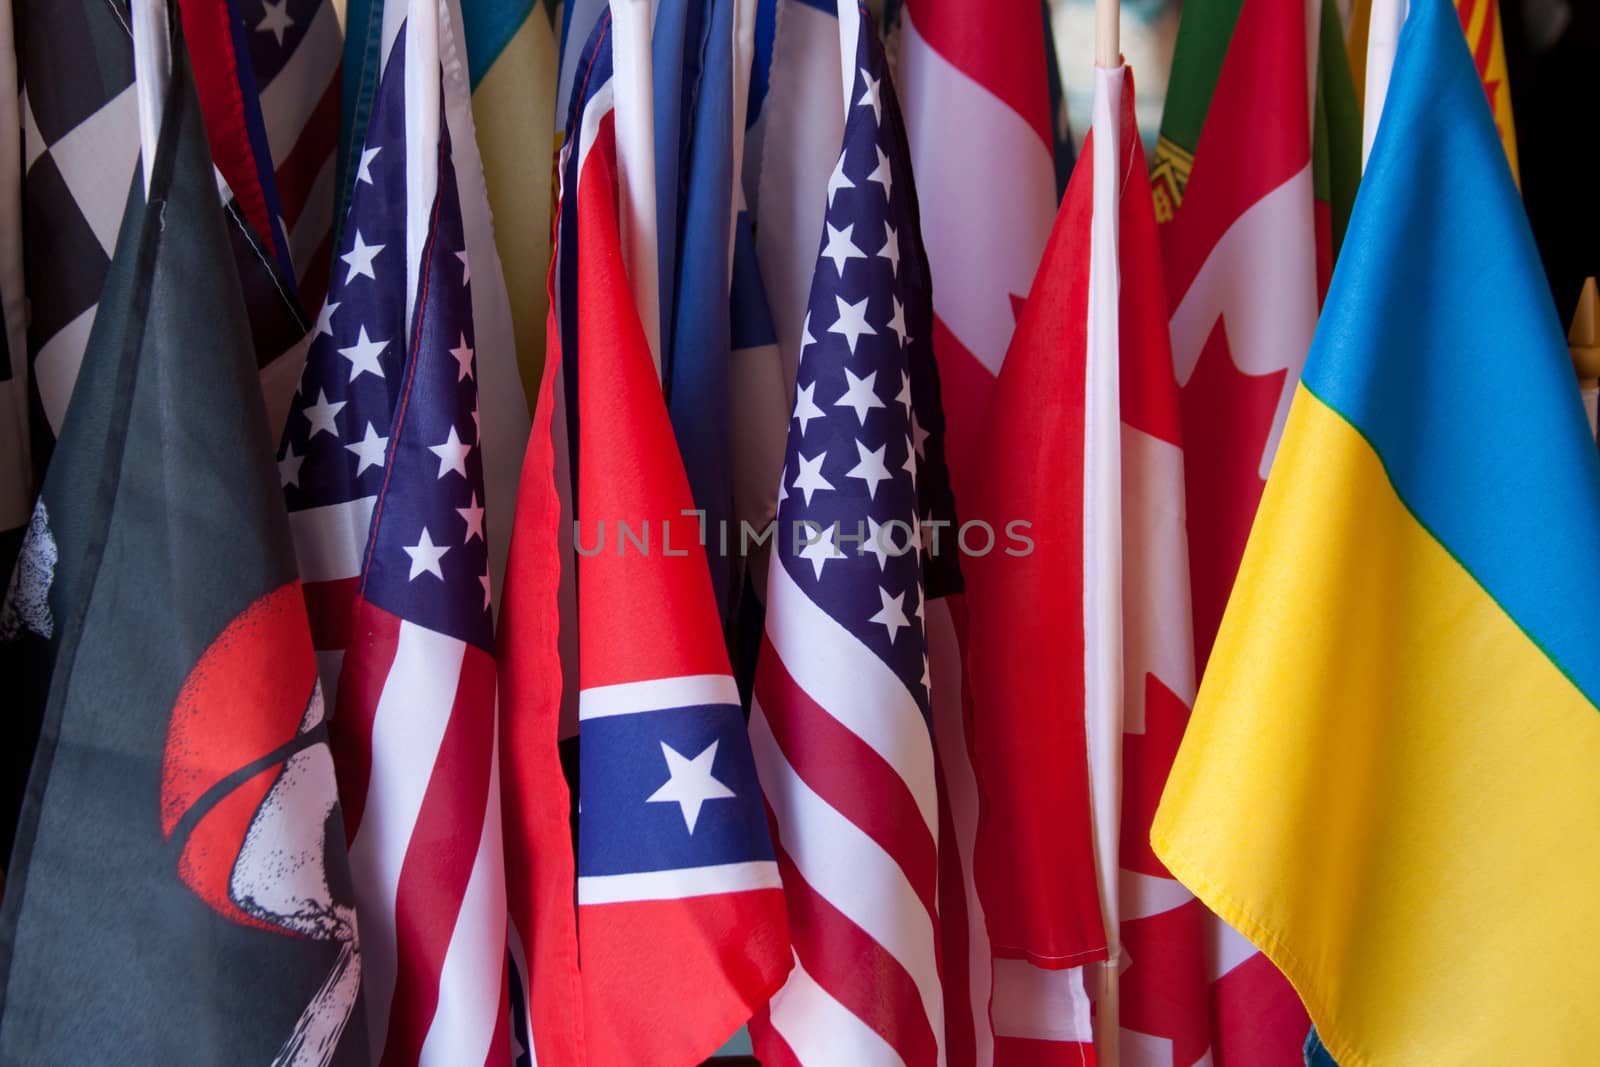 A collection of flags from many nations.